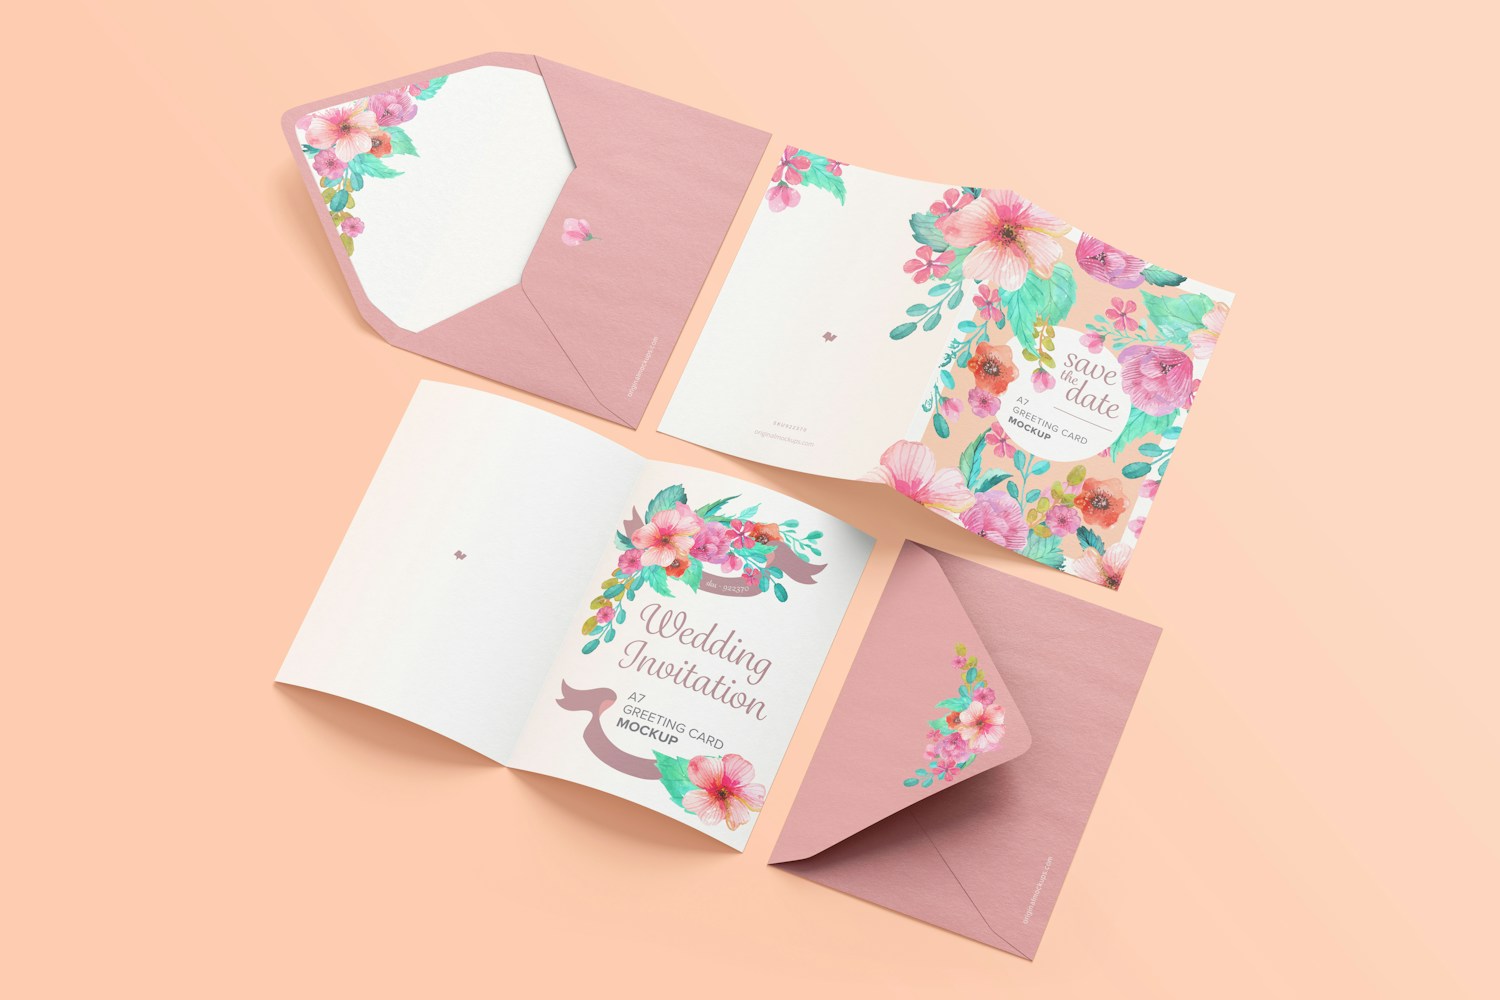 A7 Greeting Card Mockup with Envelope, Spread Exterior, and Interior Pages